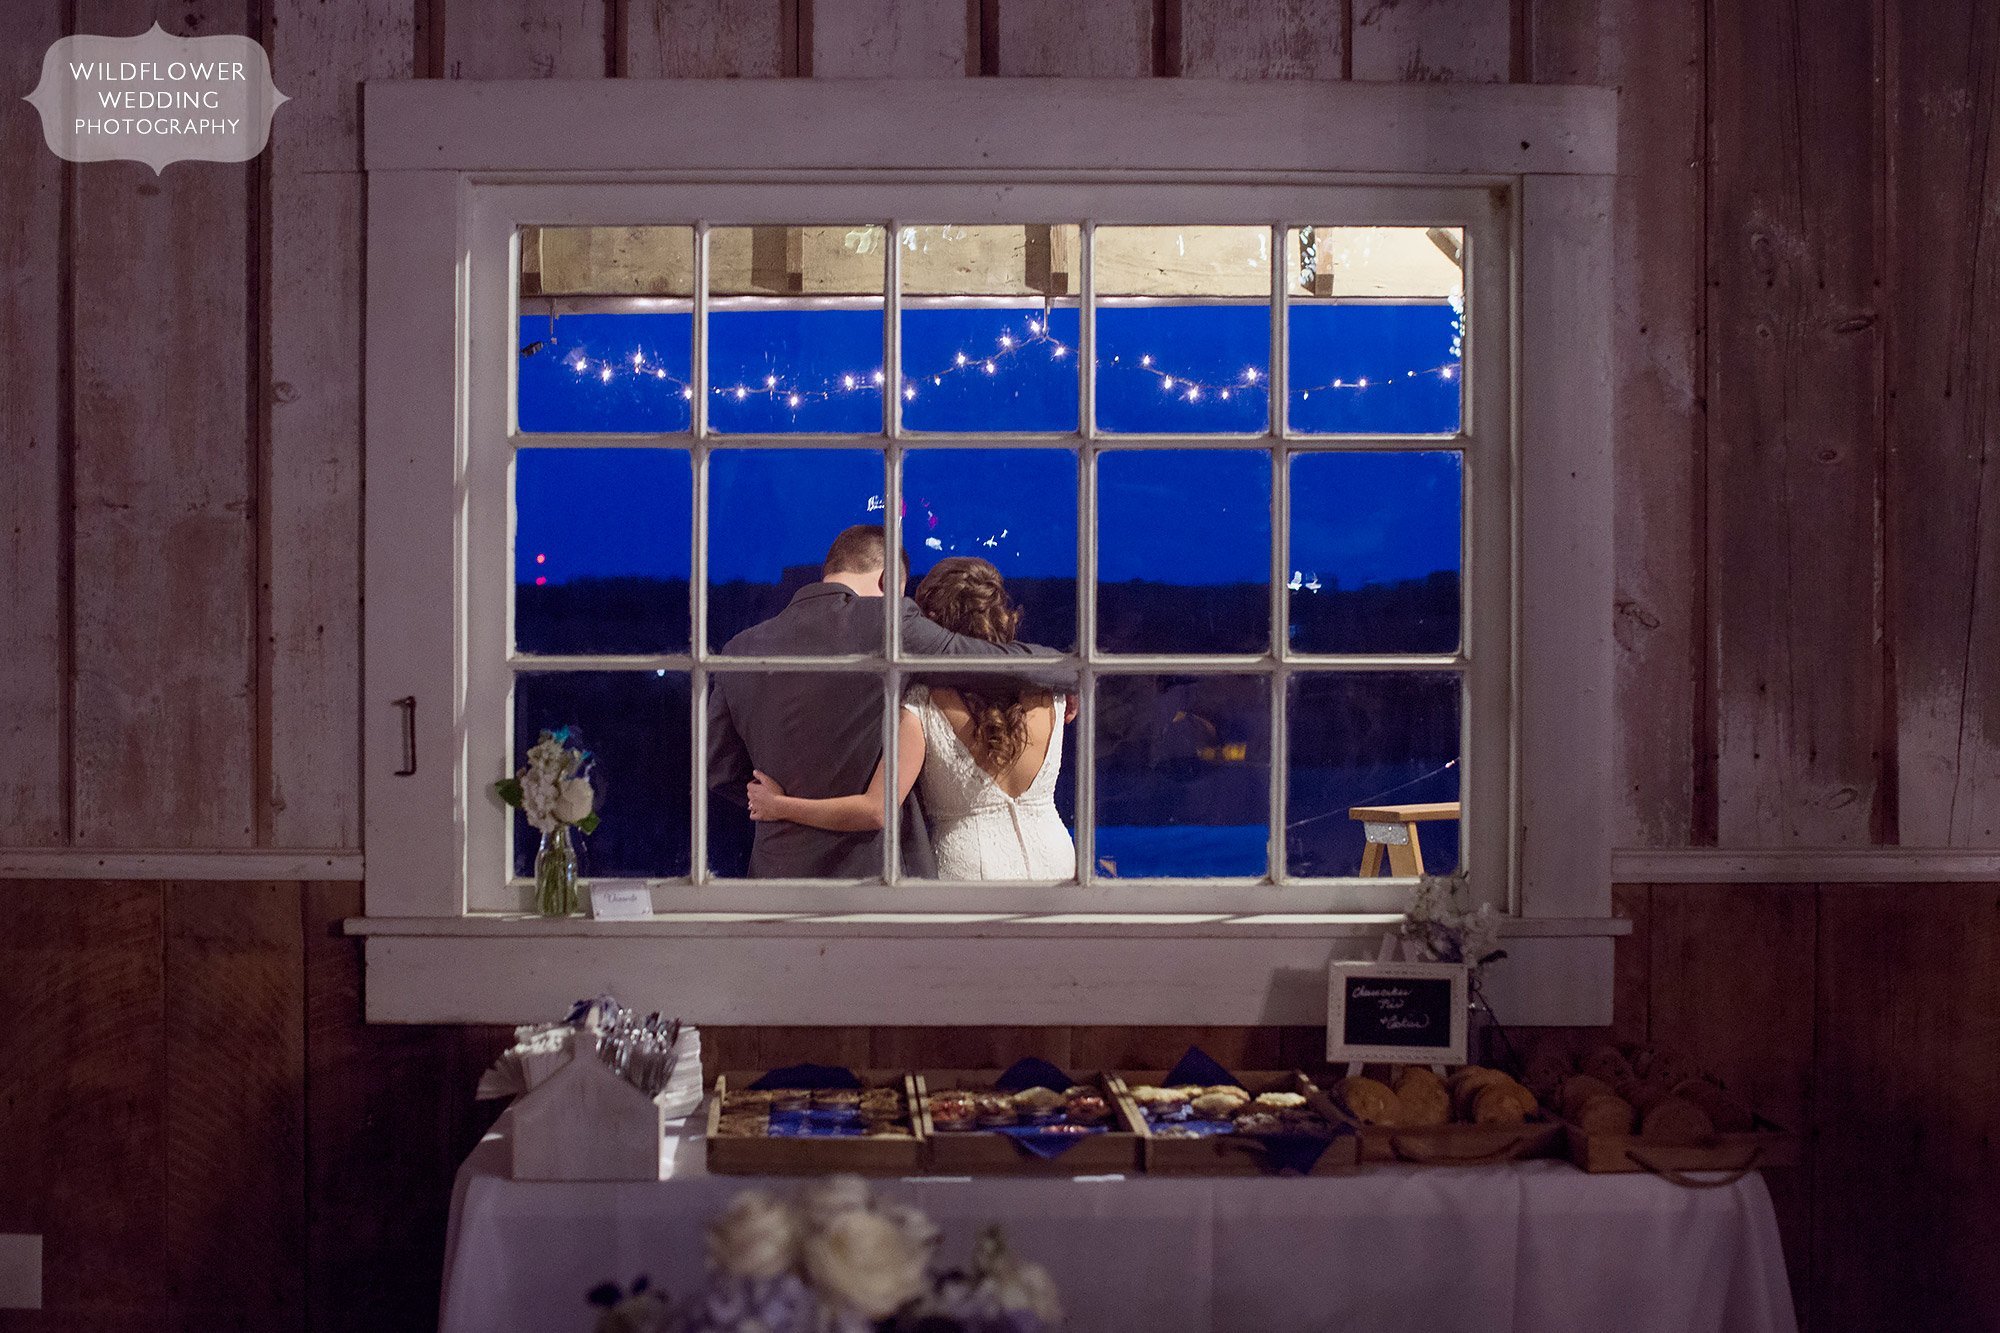 Twilight photo of the bride and groom on the porch outside of a window.